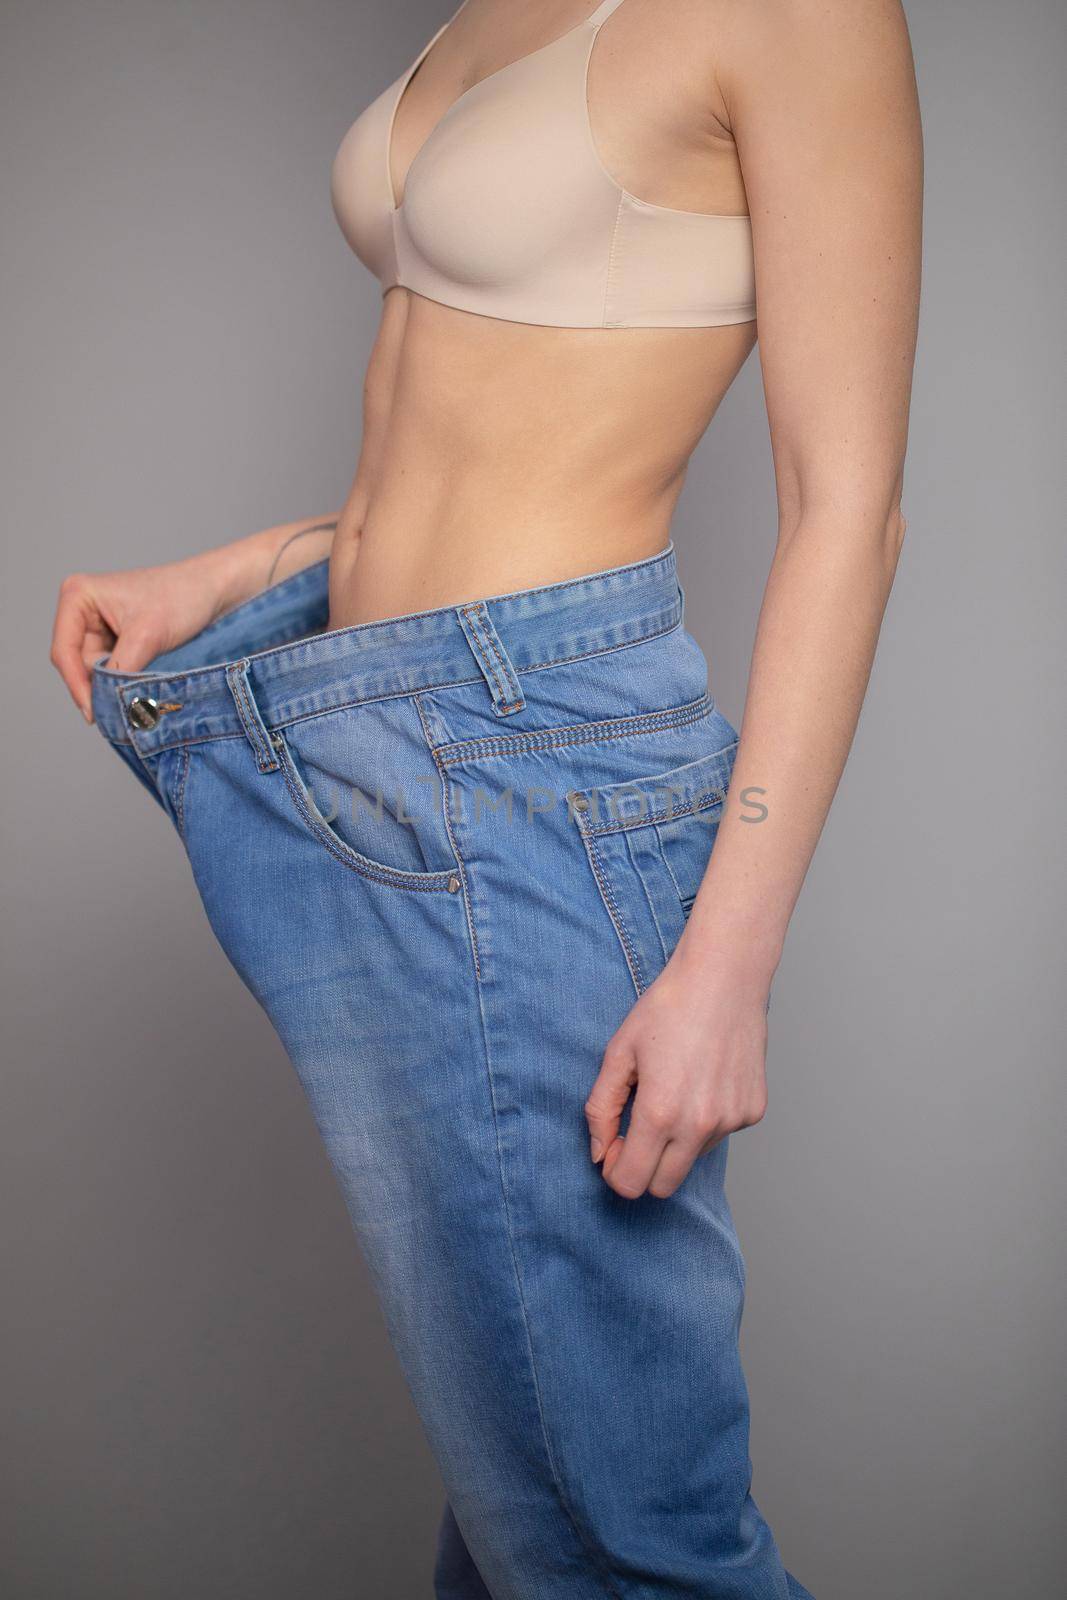 Woman Shows her Weight Loss and Wearing Her Old Jeans. Slim Girl in Big Jeans Showing How She Was Losing Weight When She Started Eating Healthy Food. by uflypro